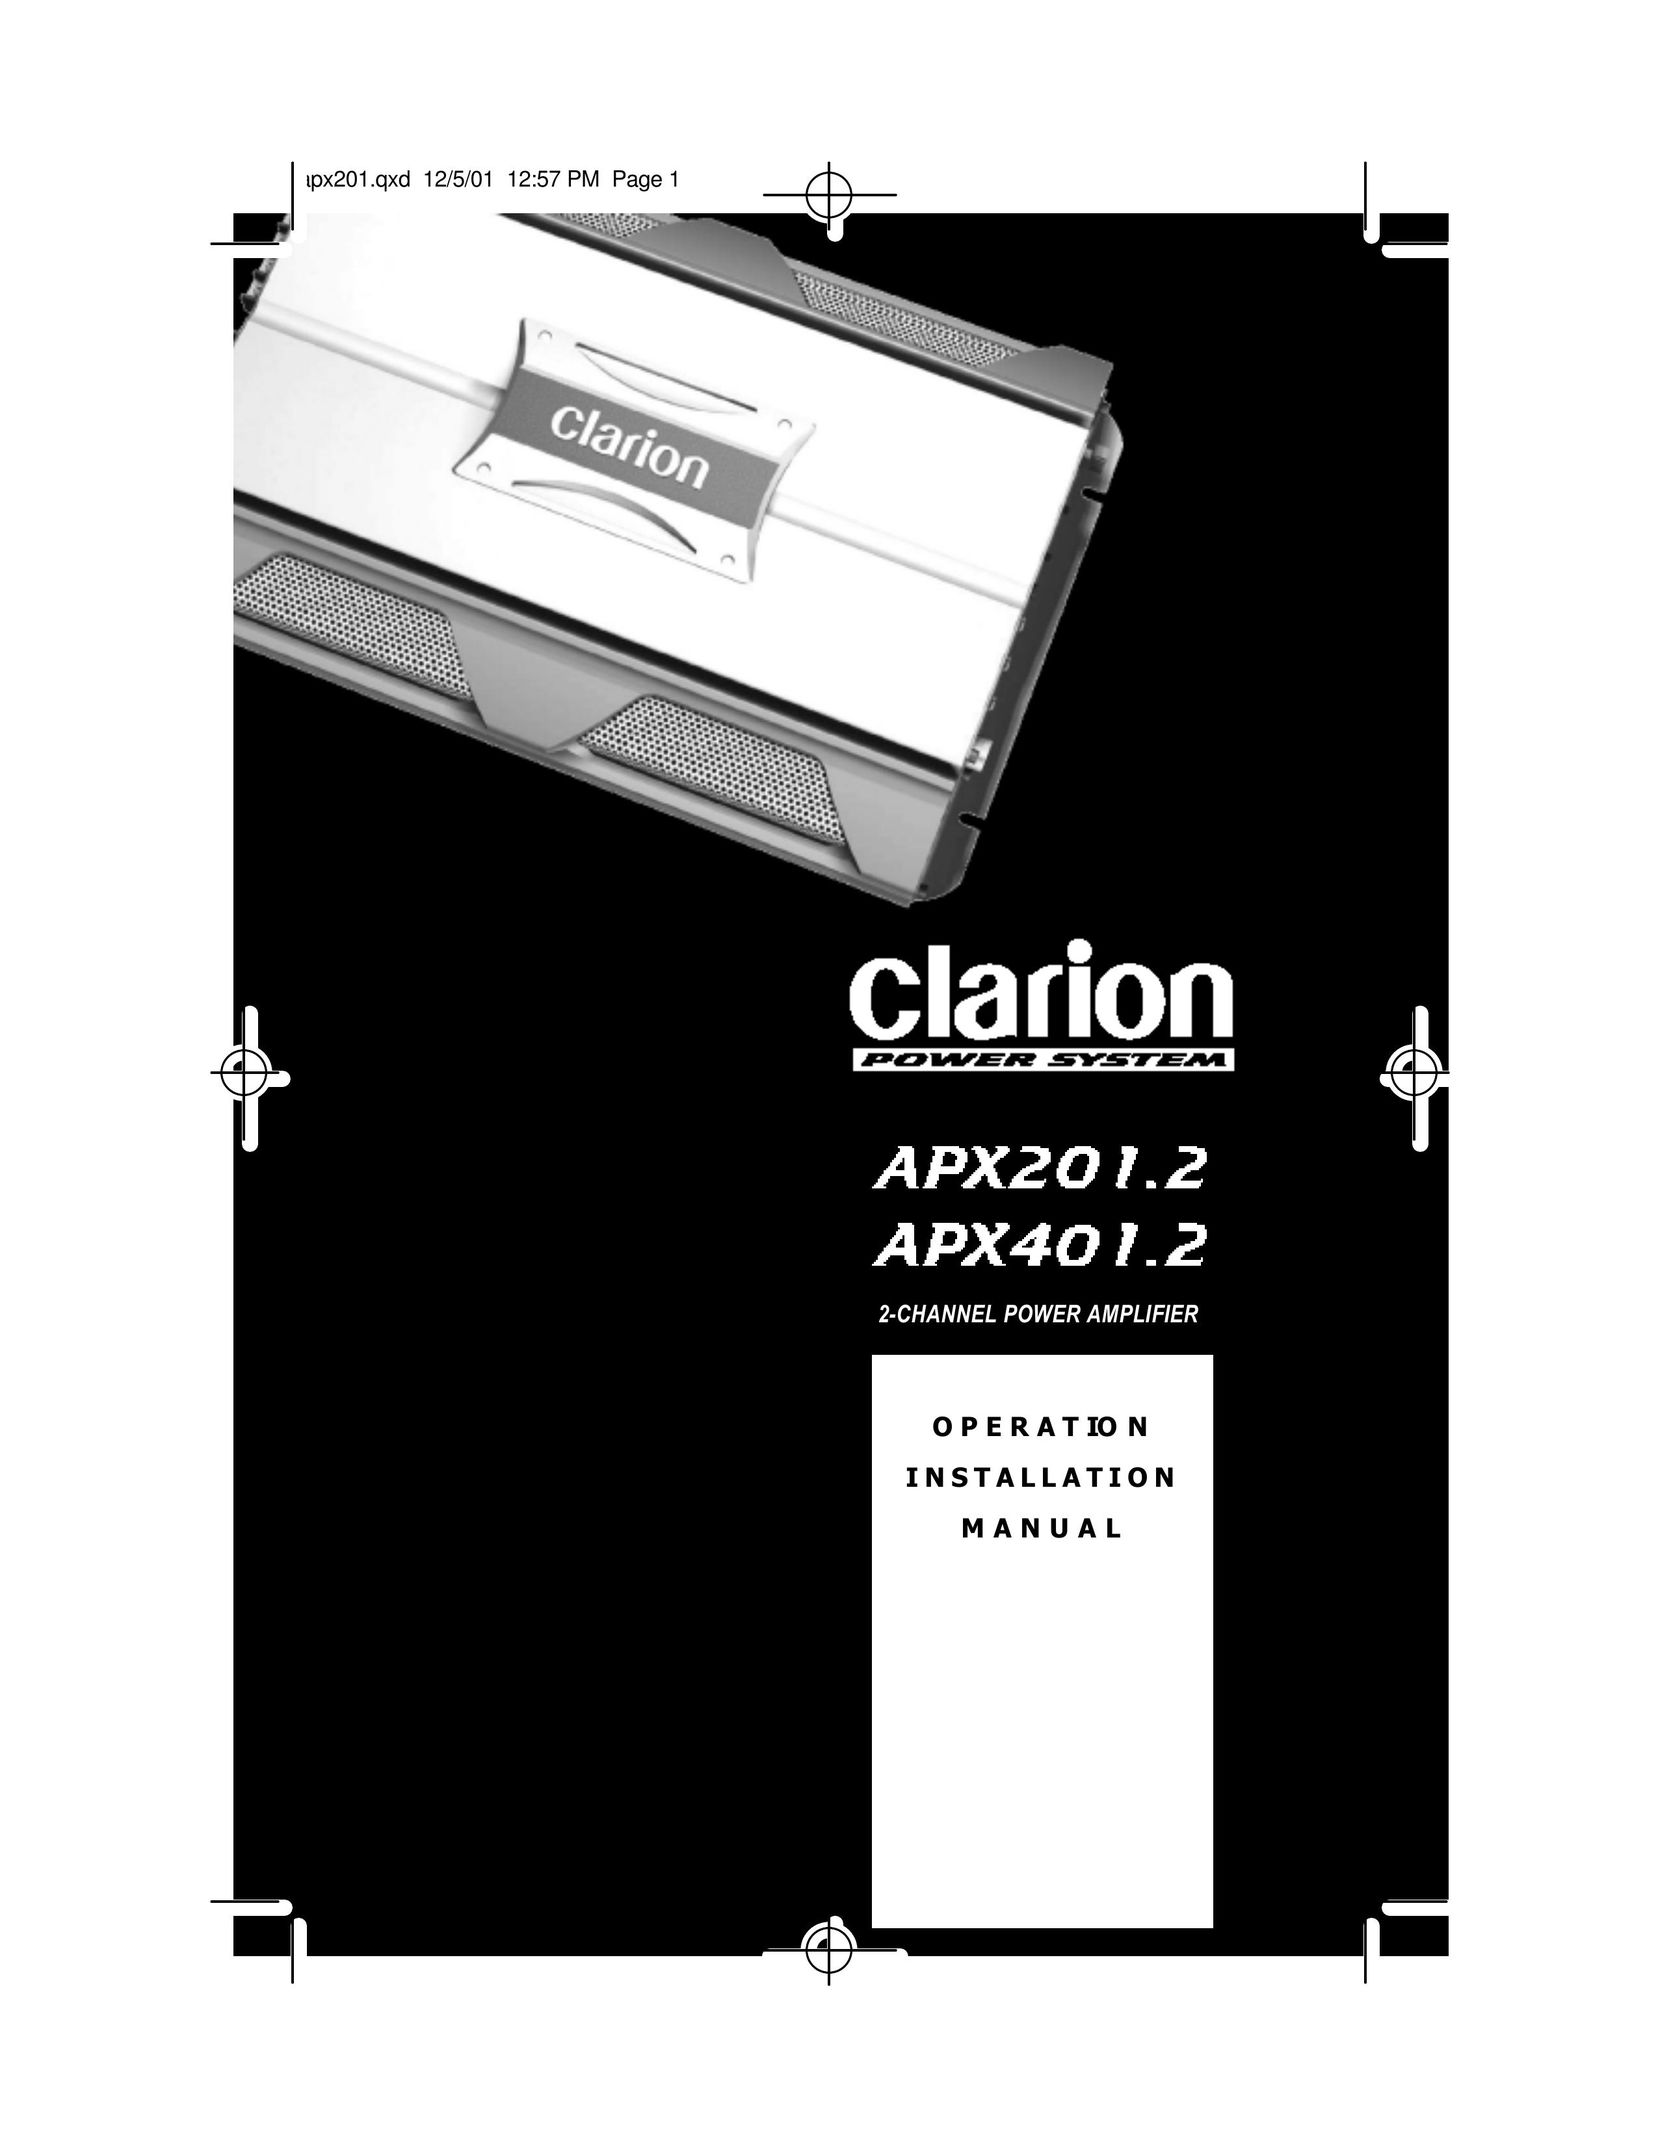 Clarion APX201.2 Stereo Amplifier User Manual